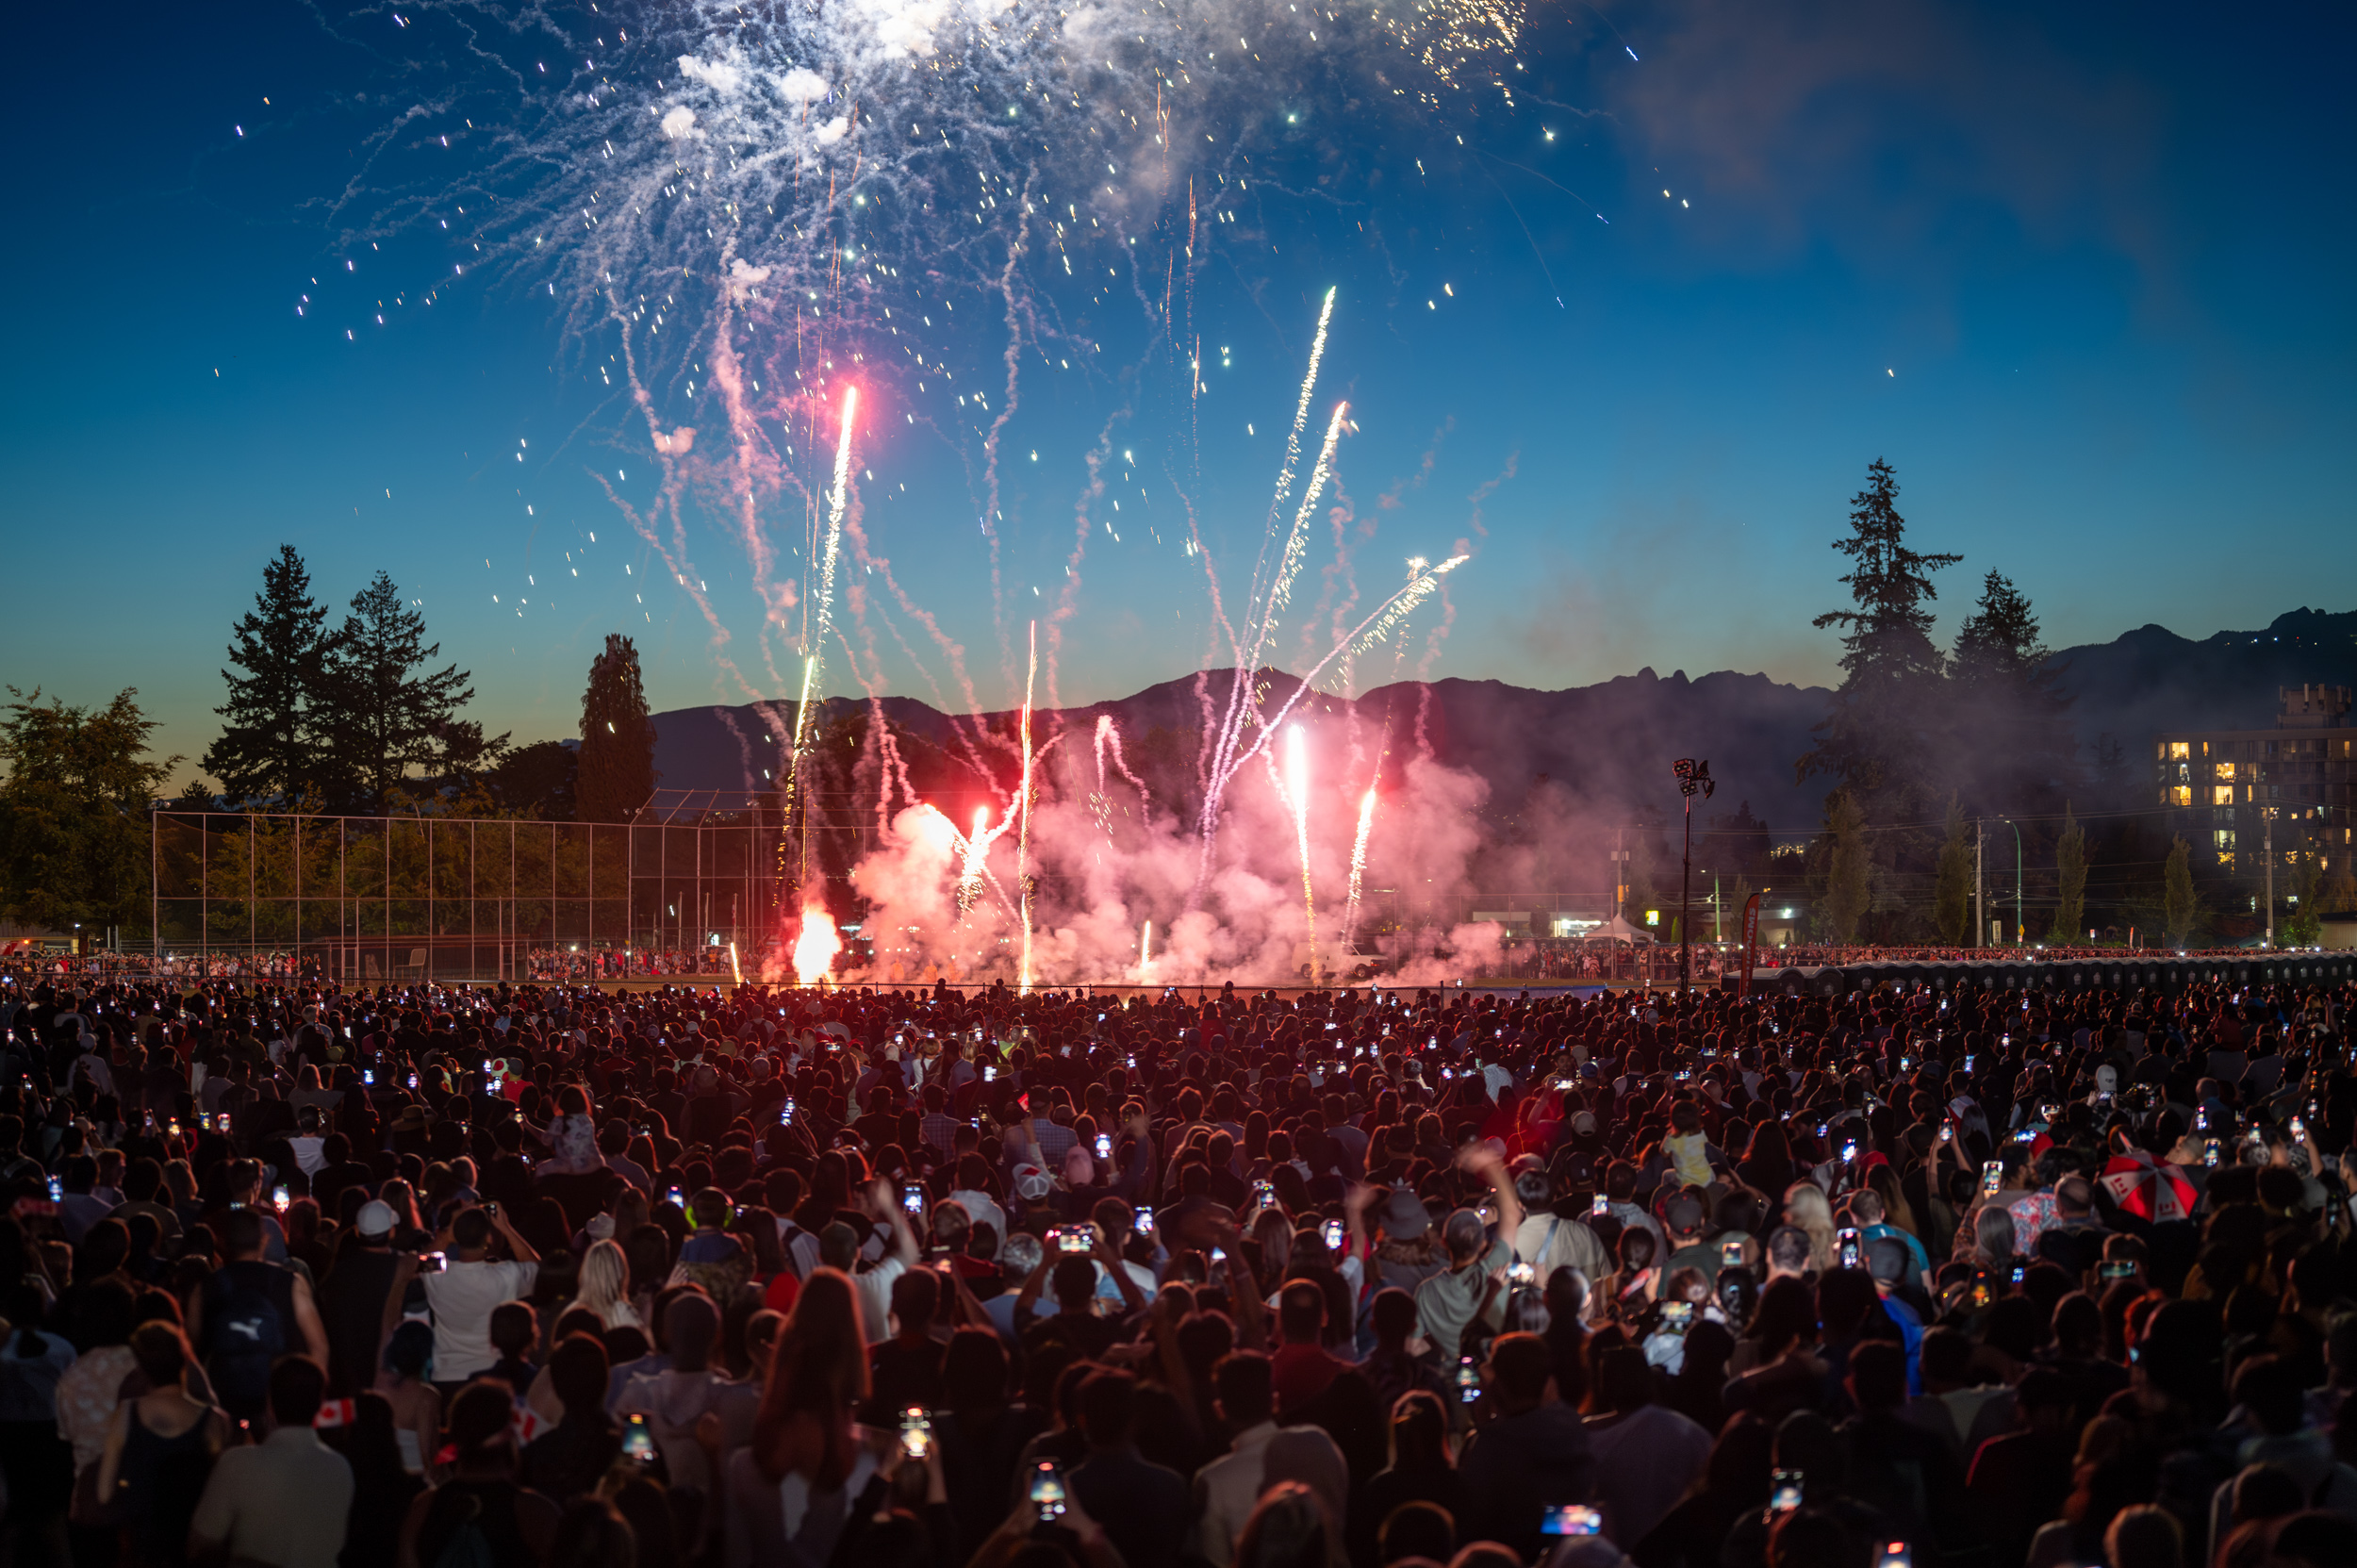 City of Burnaby's Canada Day